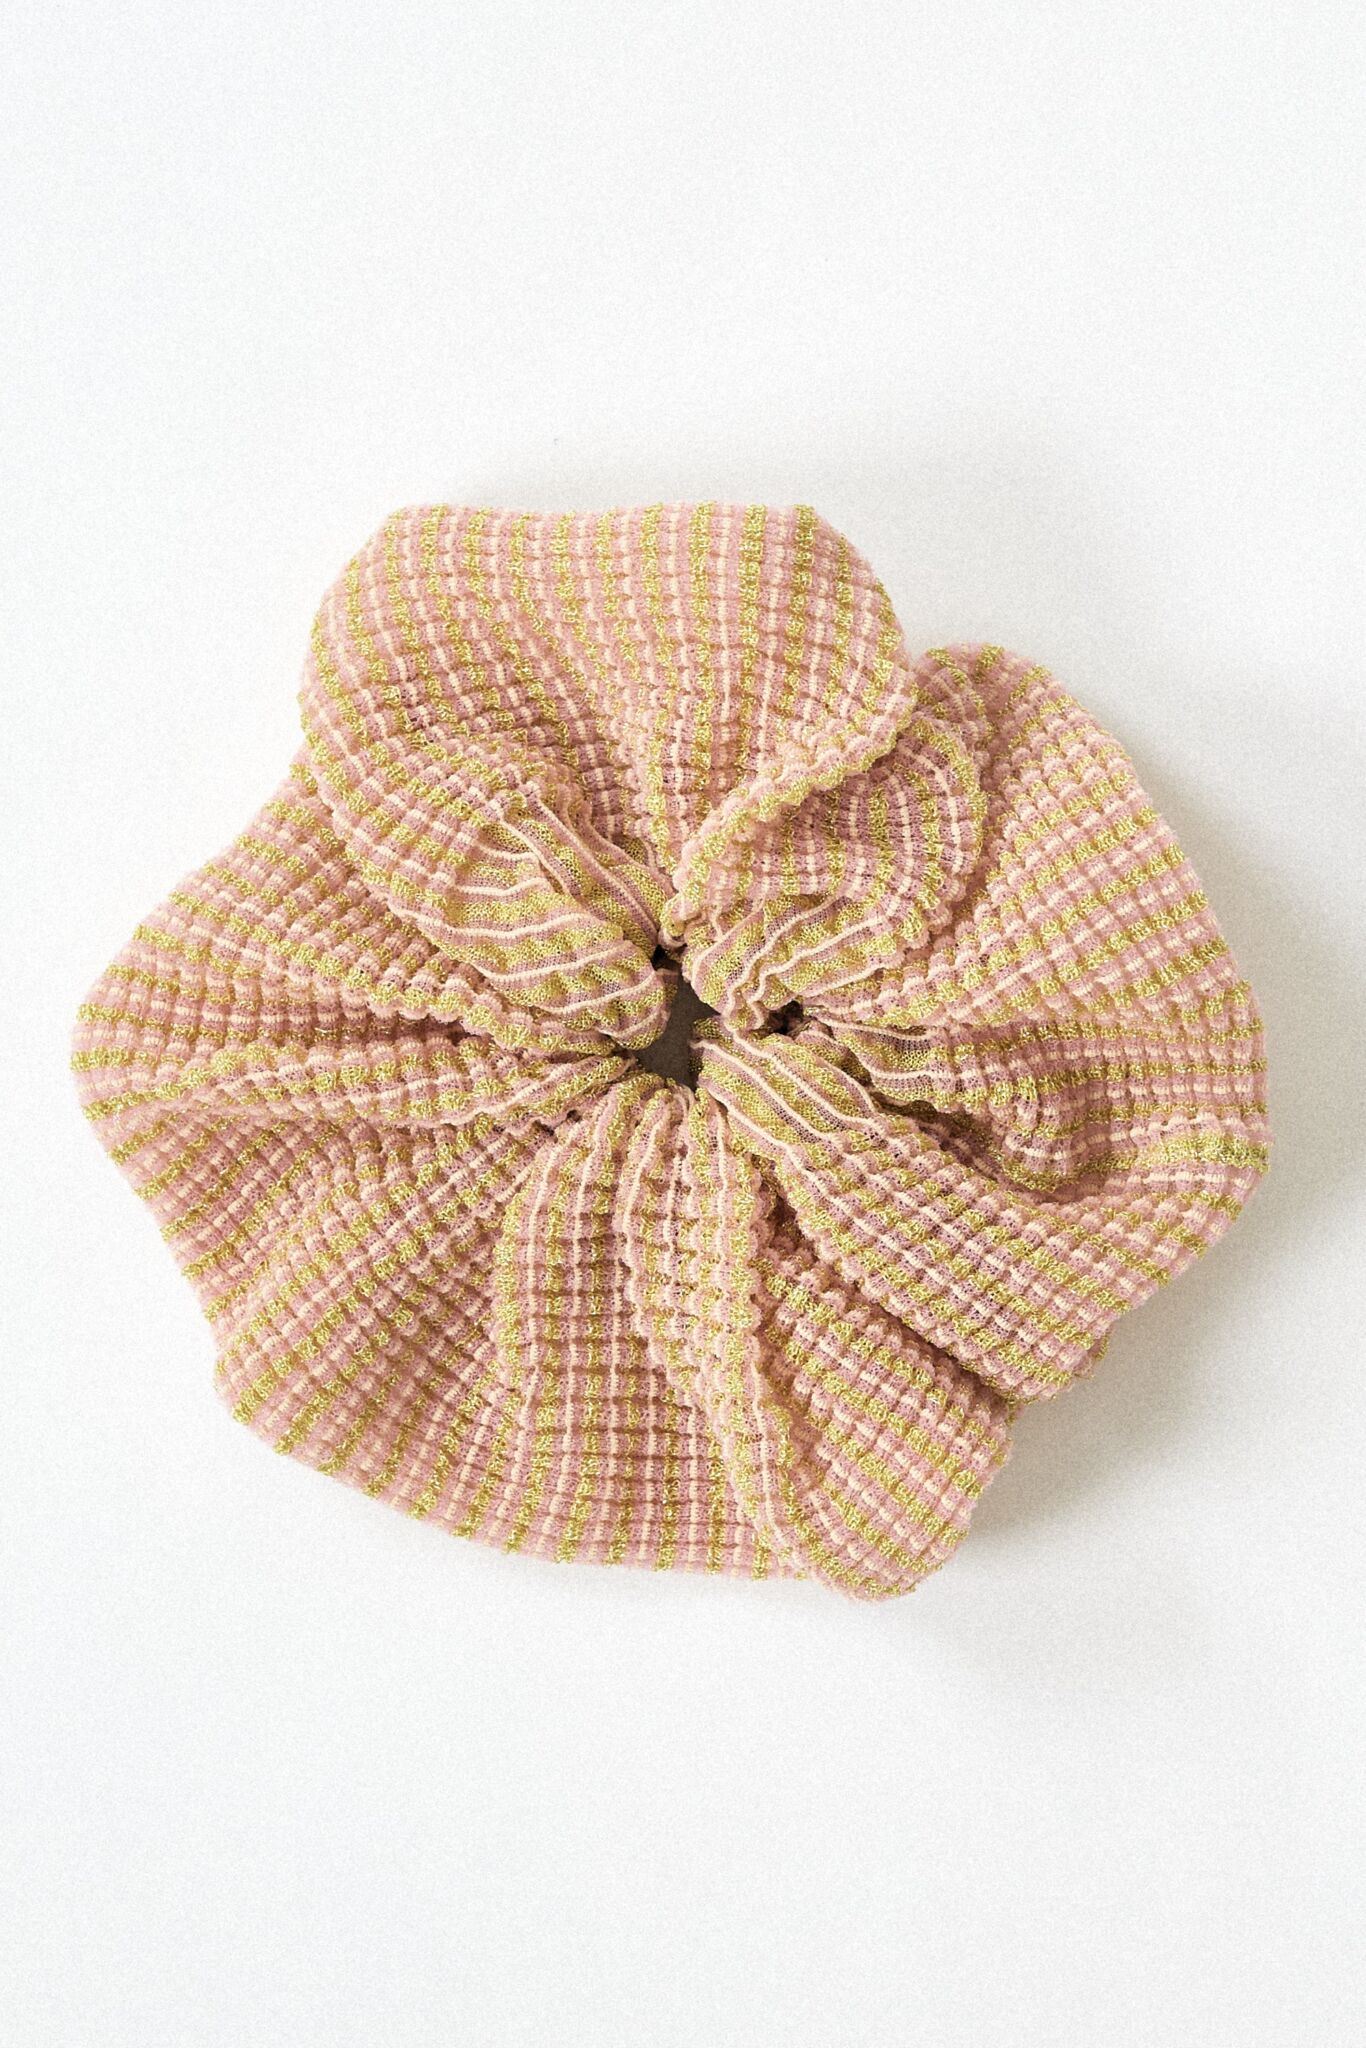 Dahlia Scrunchie in pink, knitted with glitter stripes